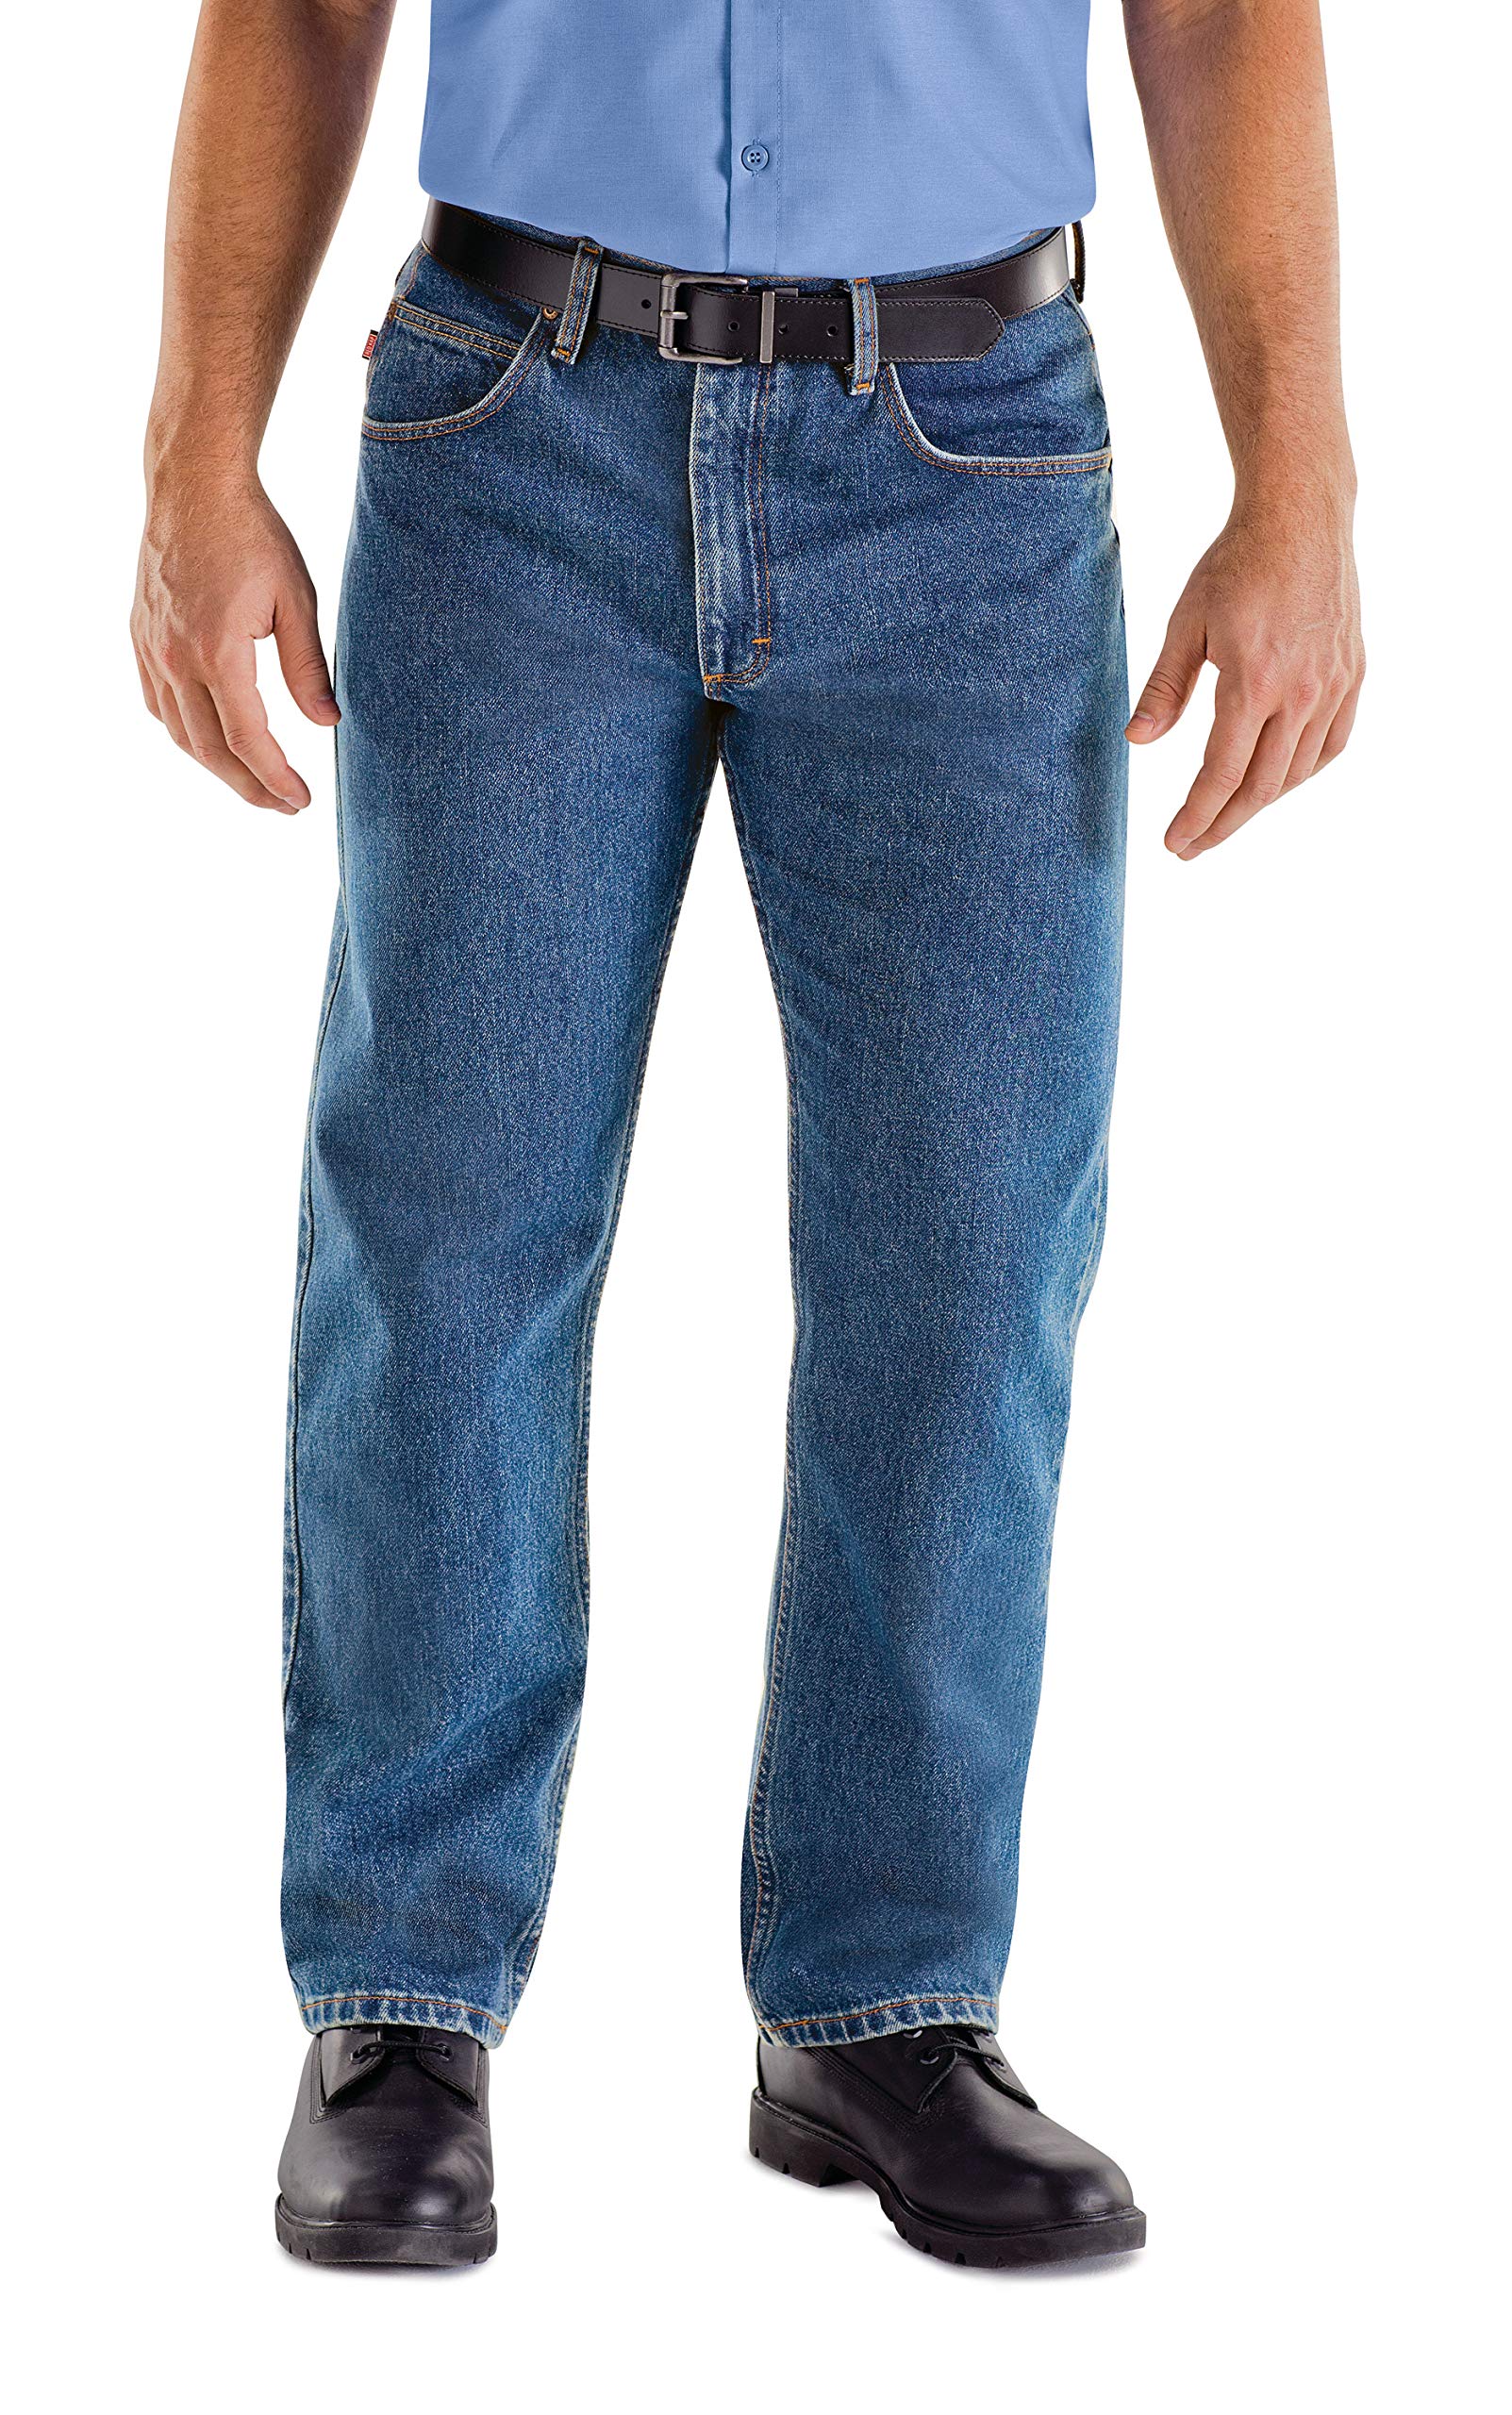 Red Kap Men's Relaxed Fit Jean